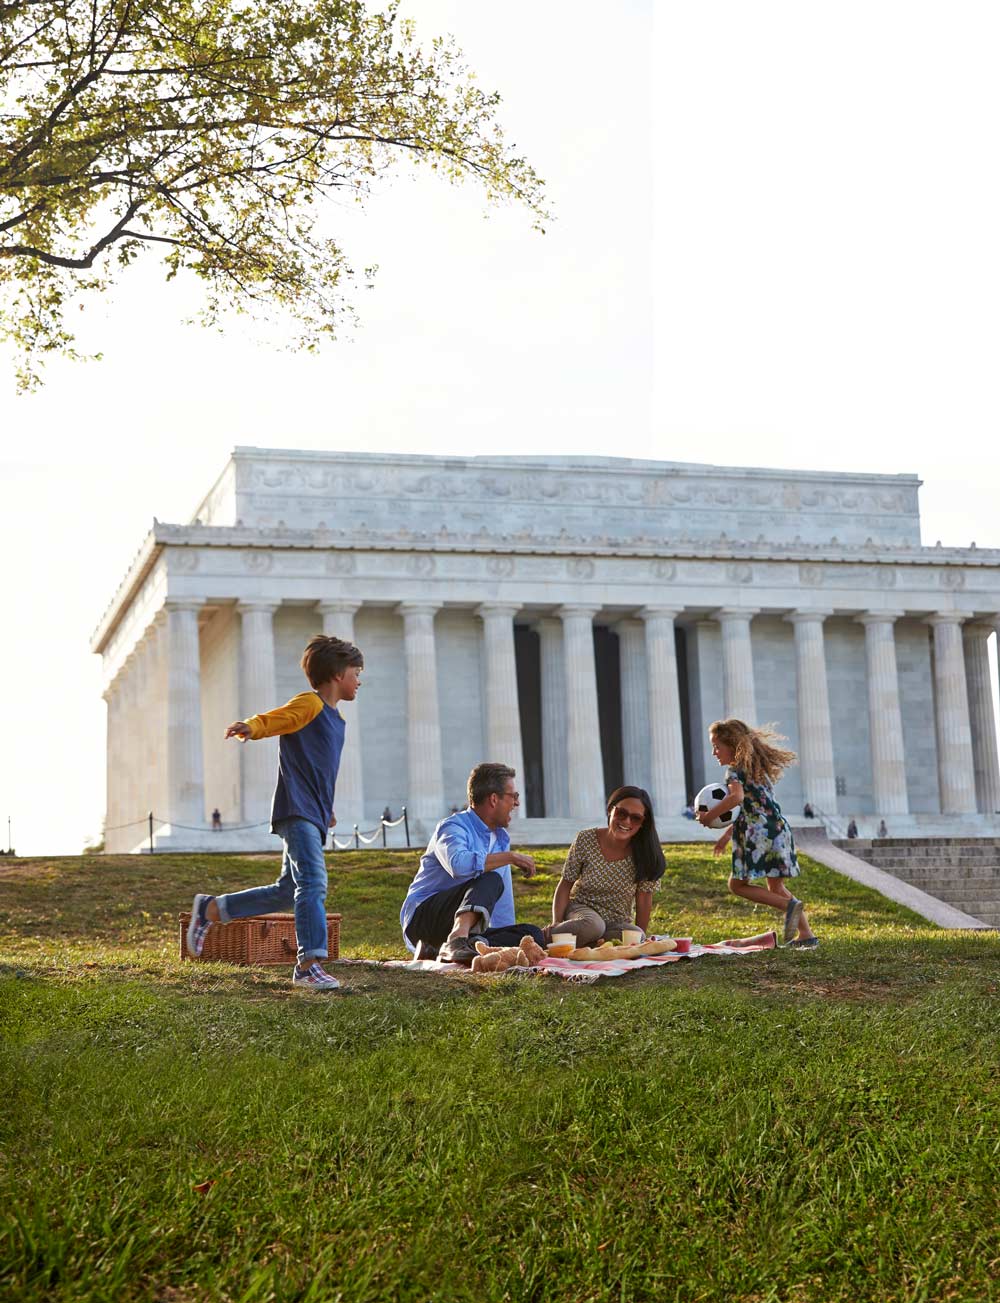 Family picnicking on National Mall by Lincoln Memorial